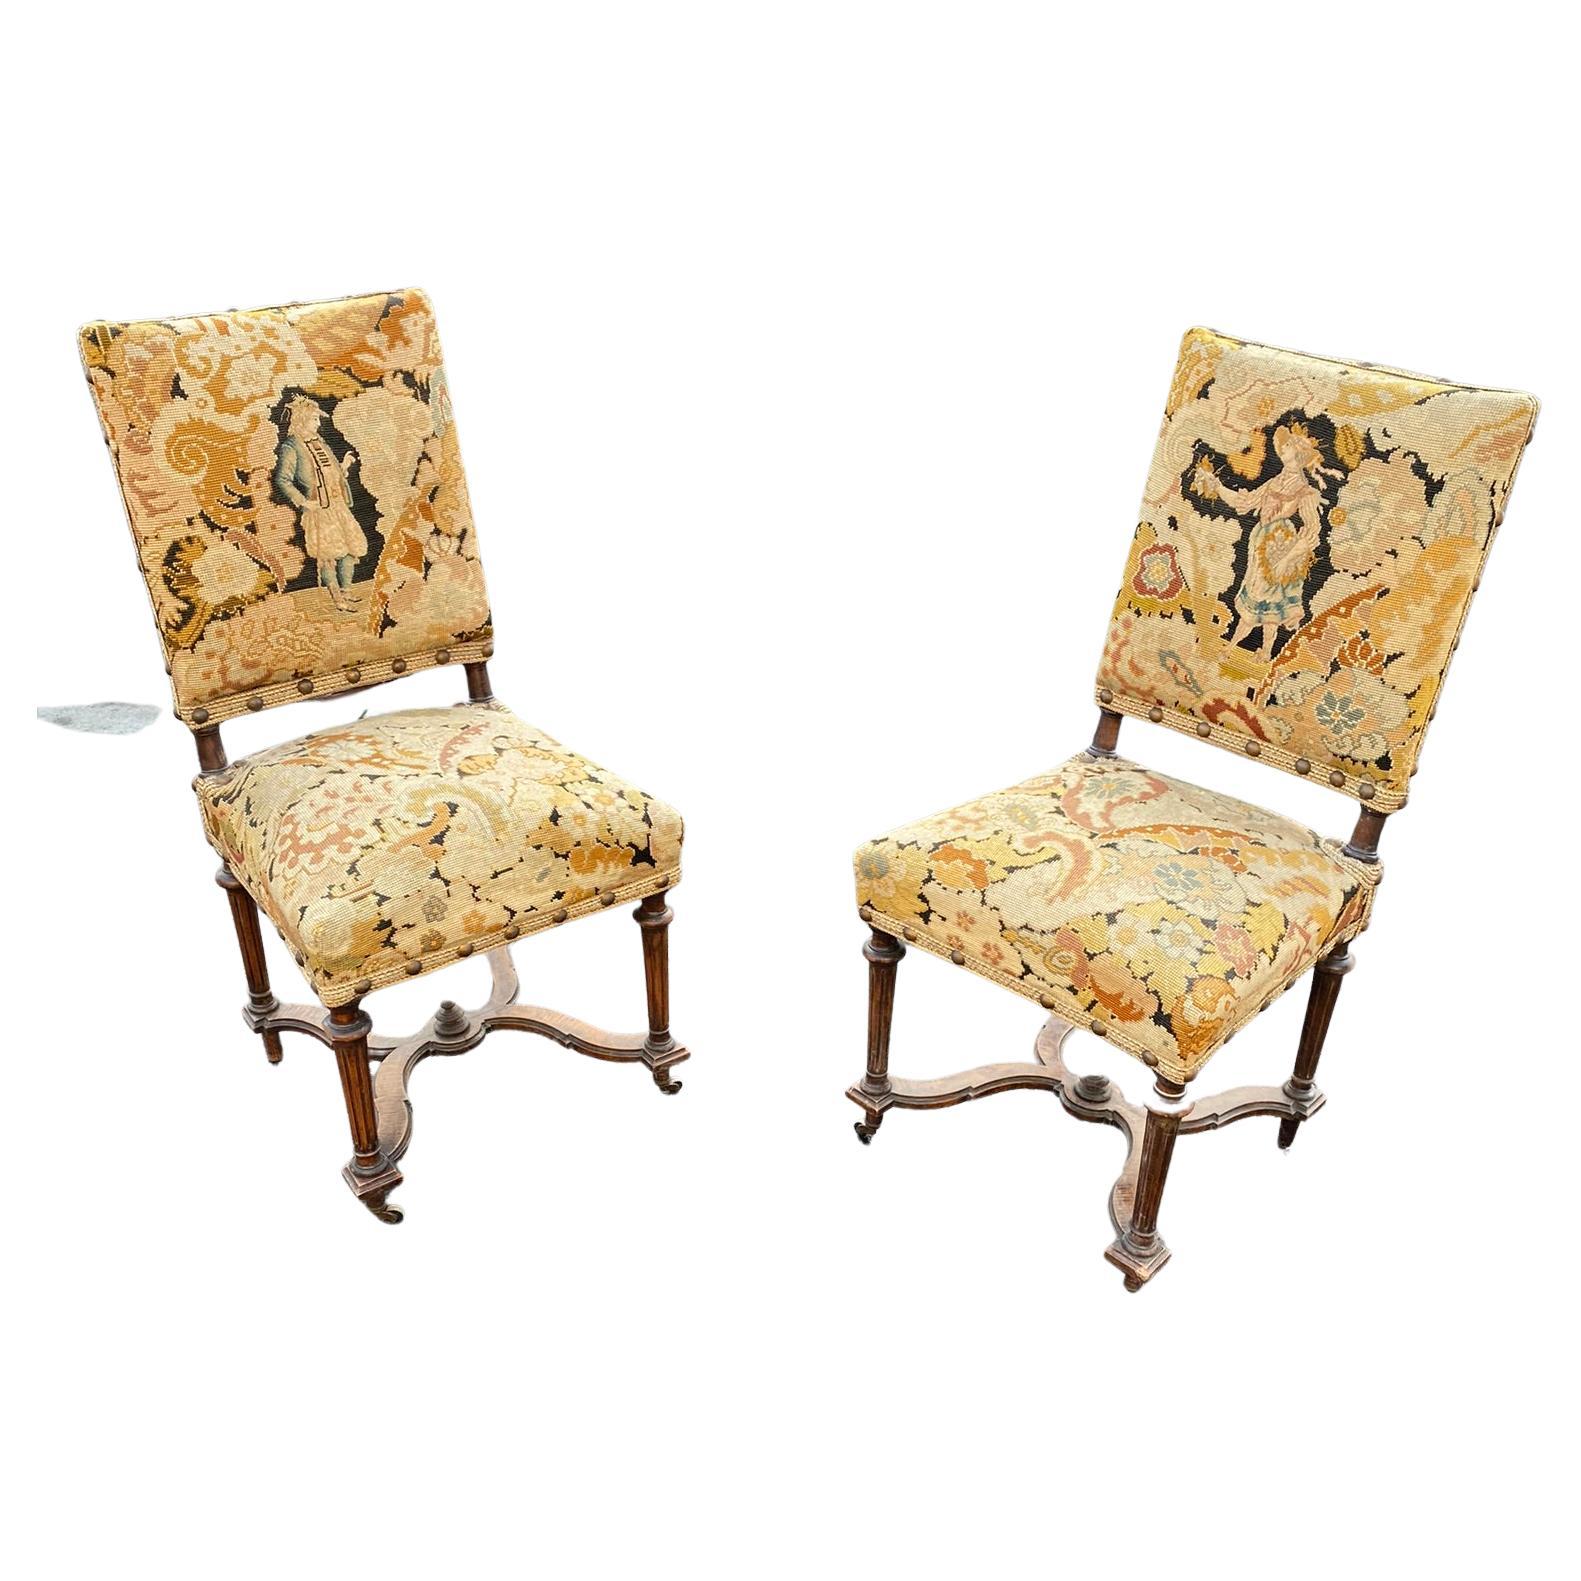 2 Henri 2 Style Chairs, with Beautiful Tapestries circa 1900